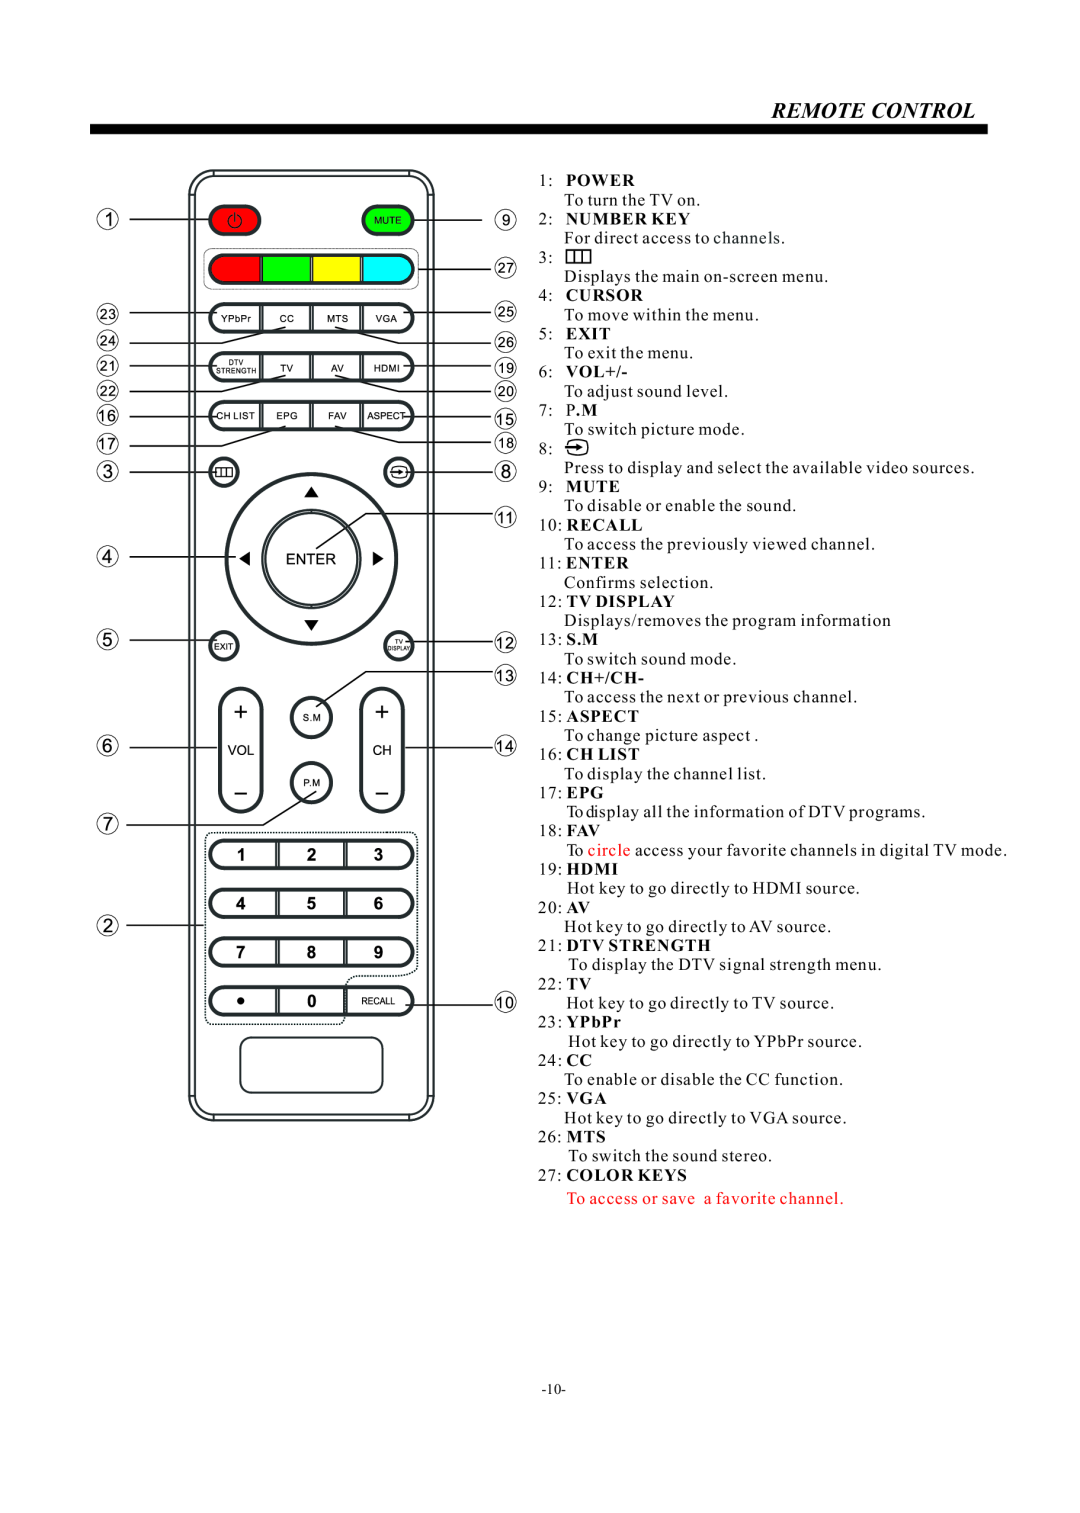 Westinghouse EU24H1G1 manual Remote Control, To access or save a favorite channel 